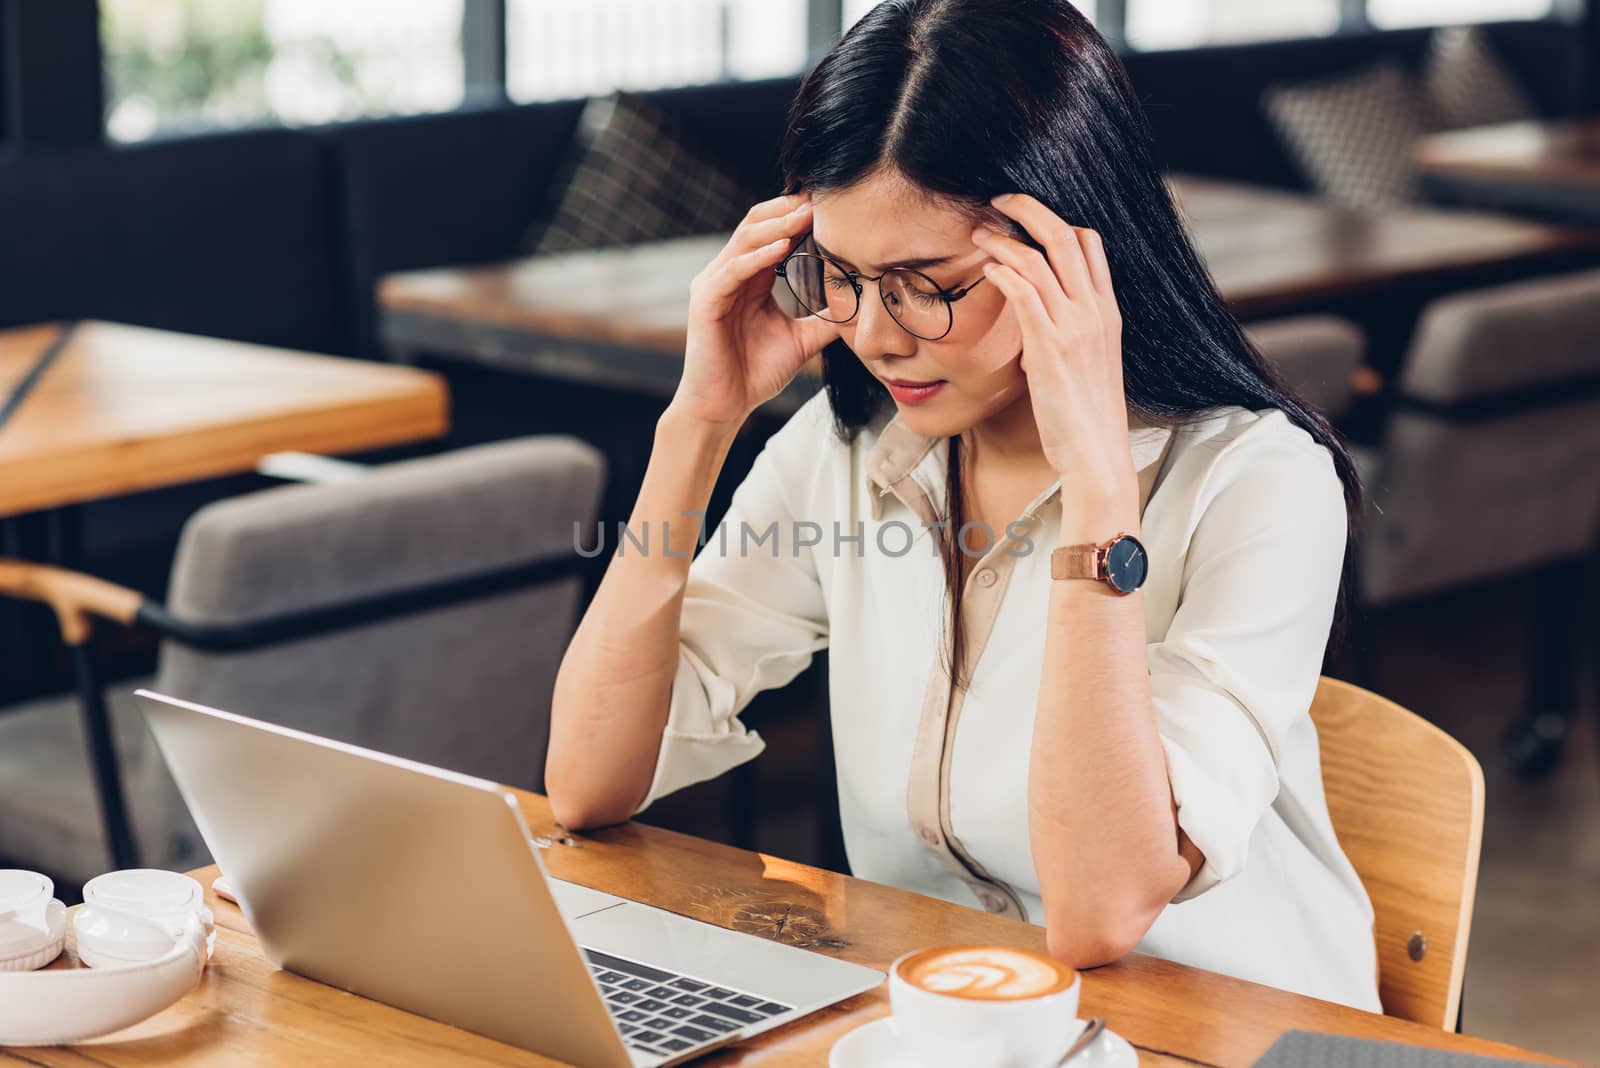 Lifestyle freelance working woman and laptop computer he headache unhappy on job in coffee cafe shop